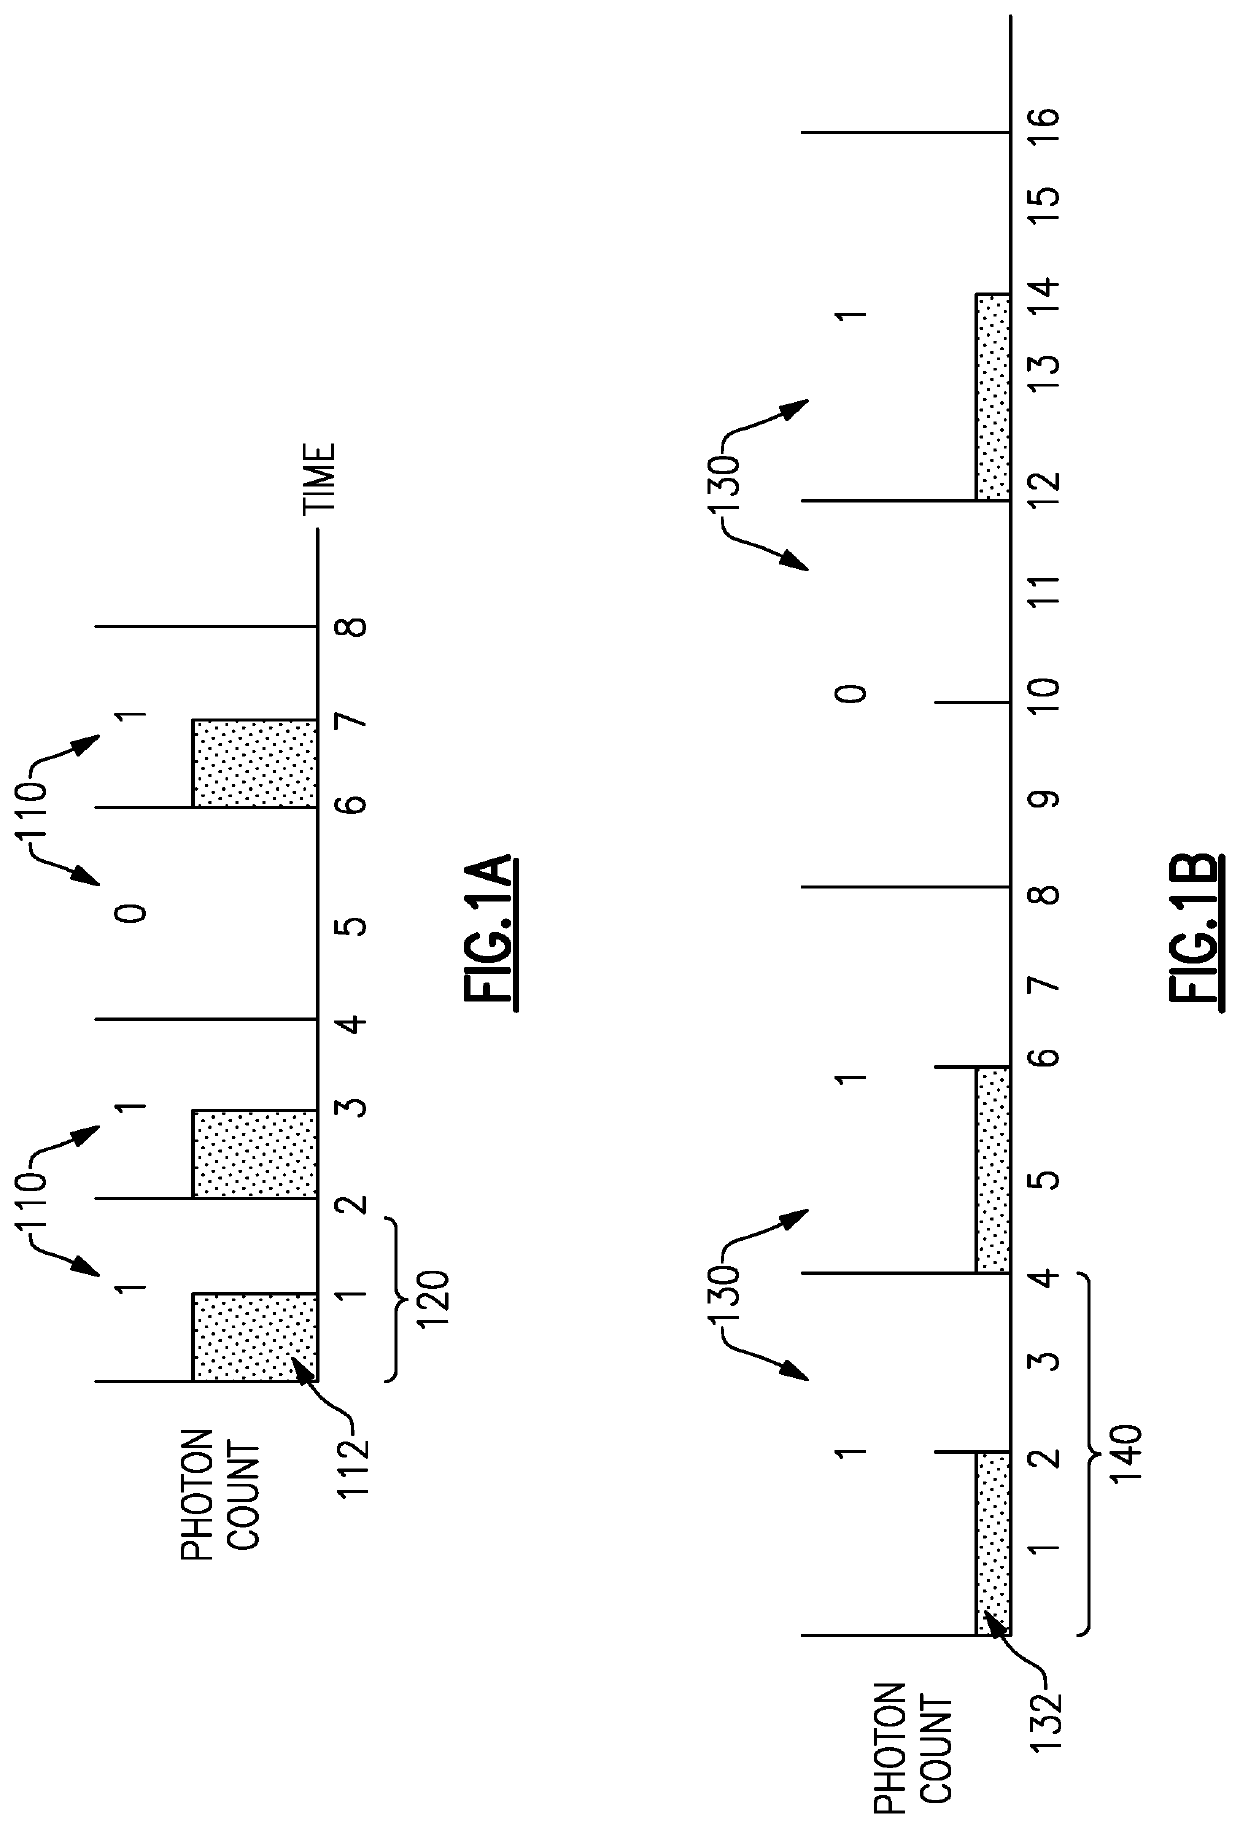 Methods and apparatus for transmission of low photon density optical signals